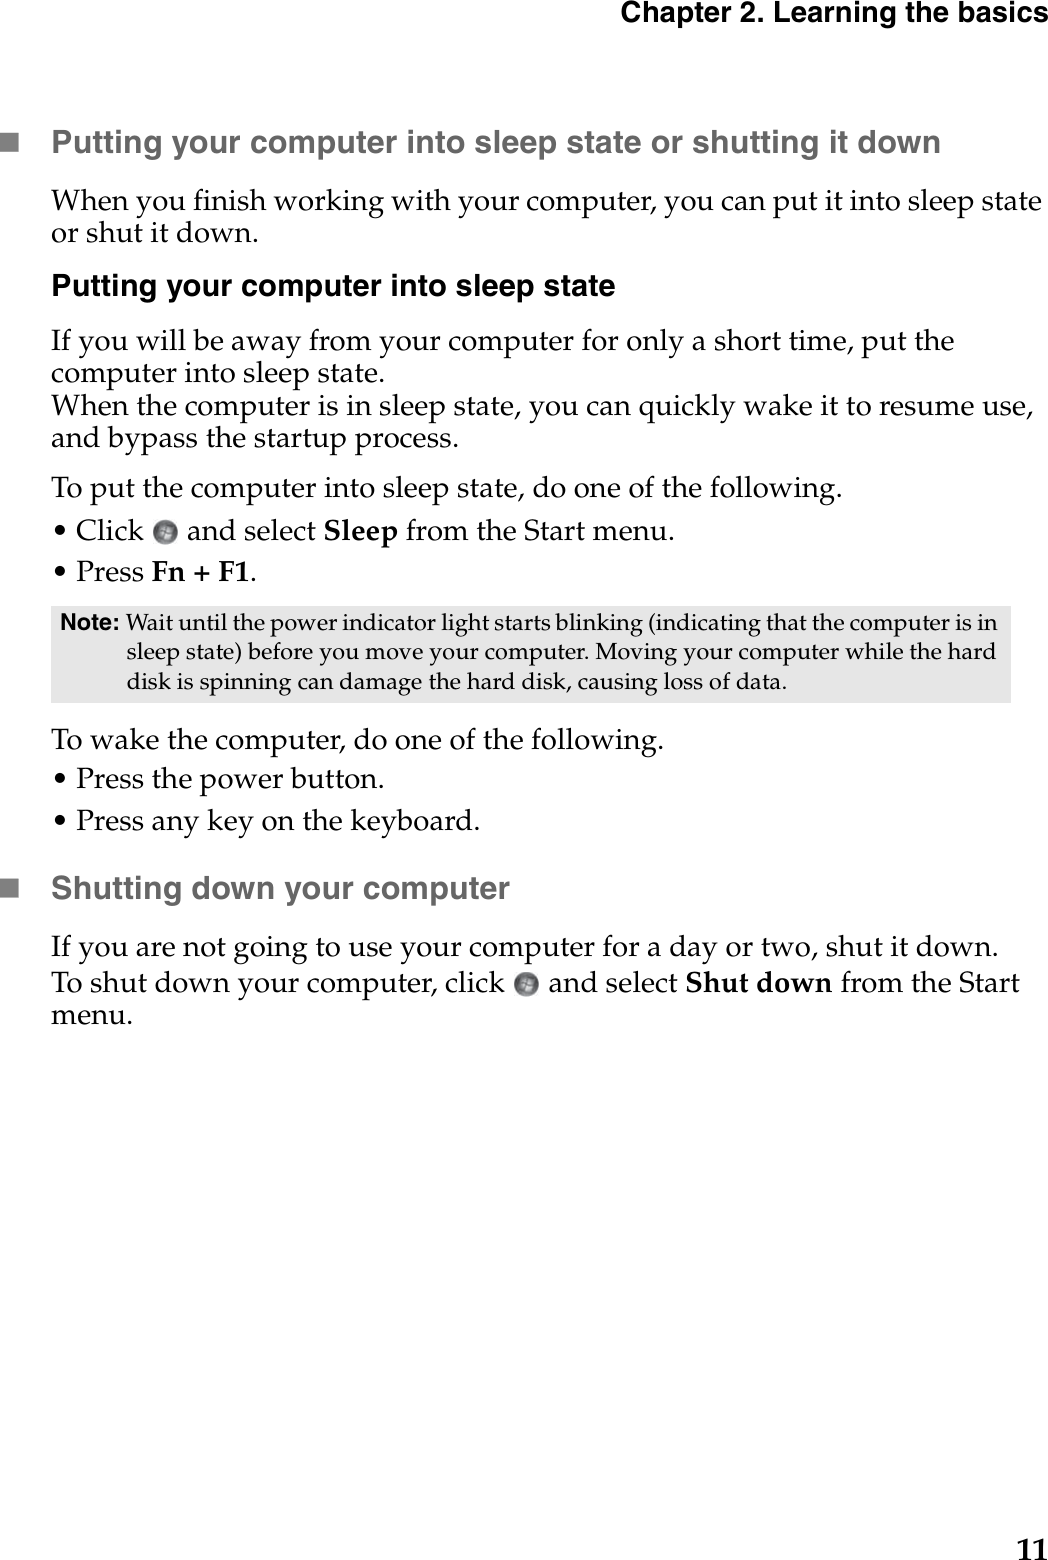 Chapter 2. Learning the basics11Putting your computer into sleep state or shutting it down When you finish working with your computer, you can put it into sleep state or shut it down.Putting your computer into sleep stateIf you will be away from your computer for only a short time, put the computer into sleep state. When the computer is in sleep state, you can quickly wake it to resume use, and bypass the startup process.To put the computer into sleep state, do one of the following.• Click   and select Sleep from the Start menu.• Press Fn + F1.To wake the computer, do one of the following.• Press the power button.• Press any key on the keyboard.Shutting down your computerIf you are not going to use your computer for a day or two, shut it down.To shut down your computer, click  and select Shut down from the Start menu.Note: Wait until the power indicator light starts blinking (indicating that the computer is in sleep state) before you move your computer. Moving your computer while the hard disk is spinning can damage the hard disk, causing loss of data.